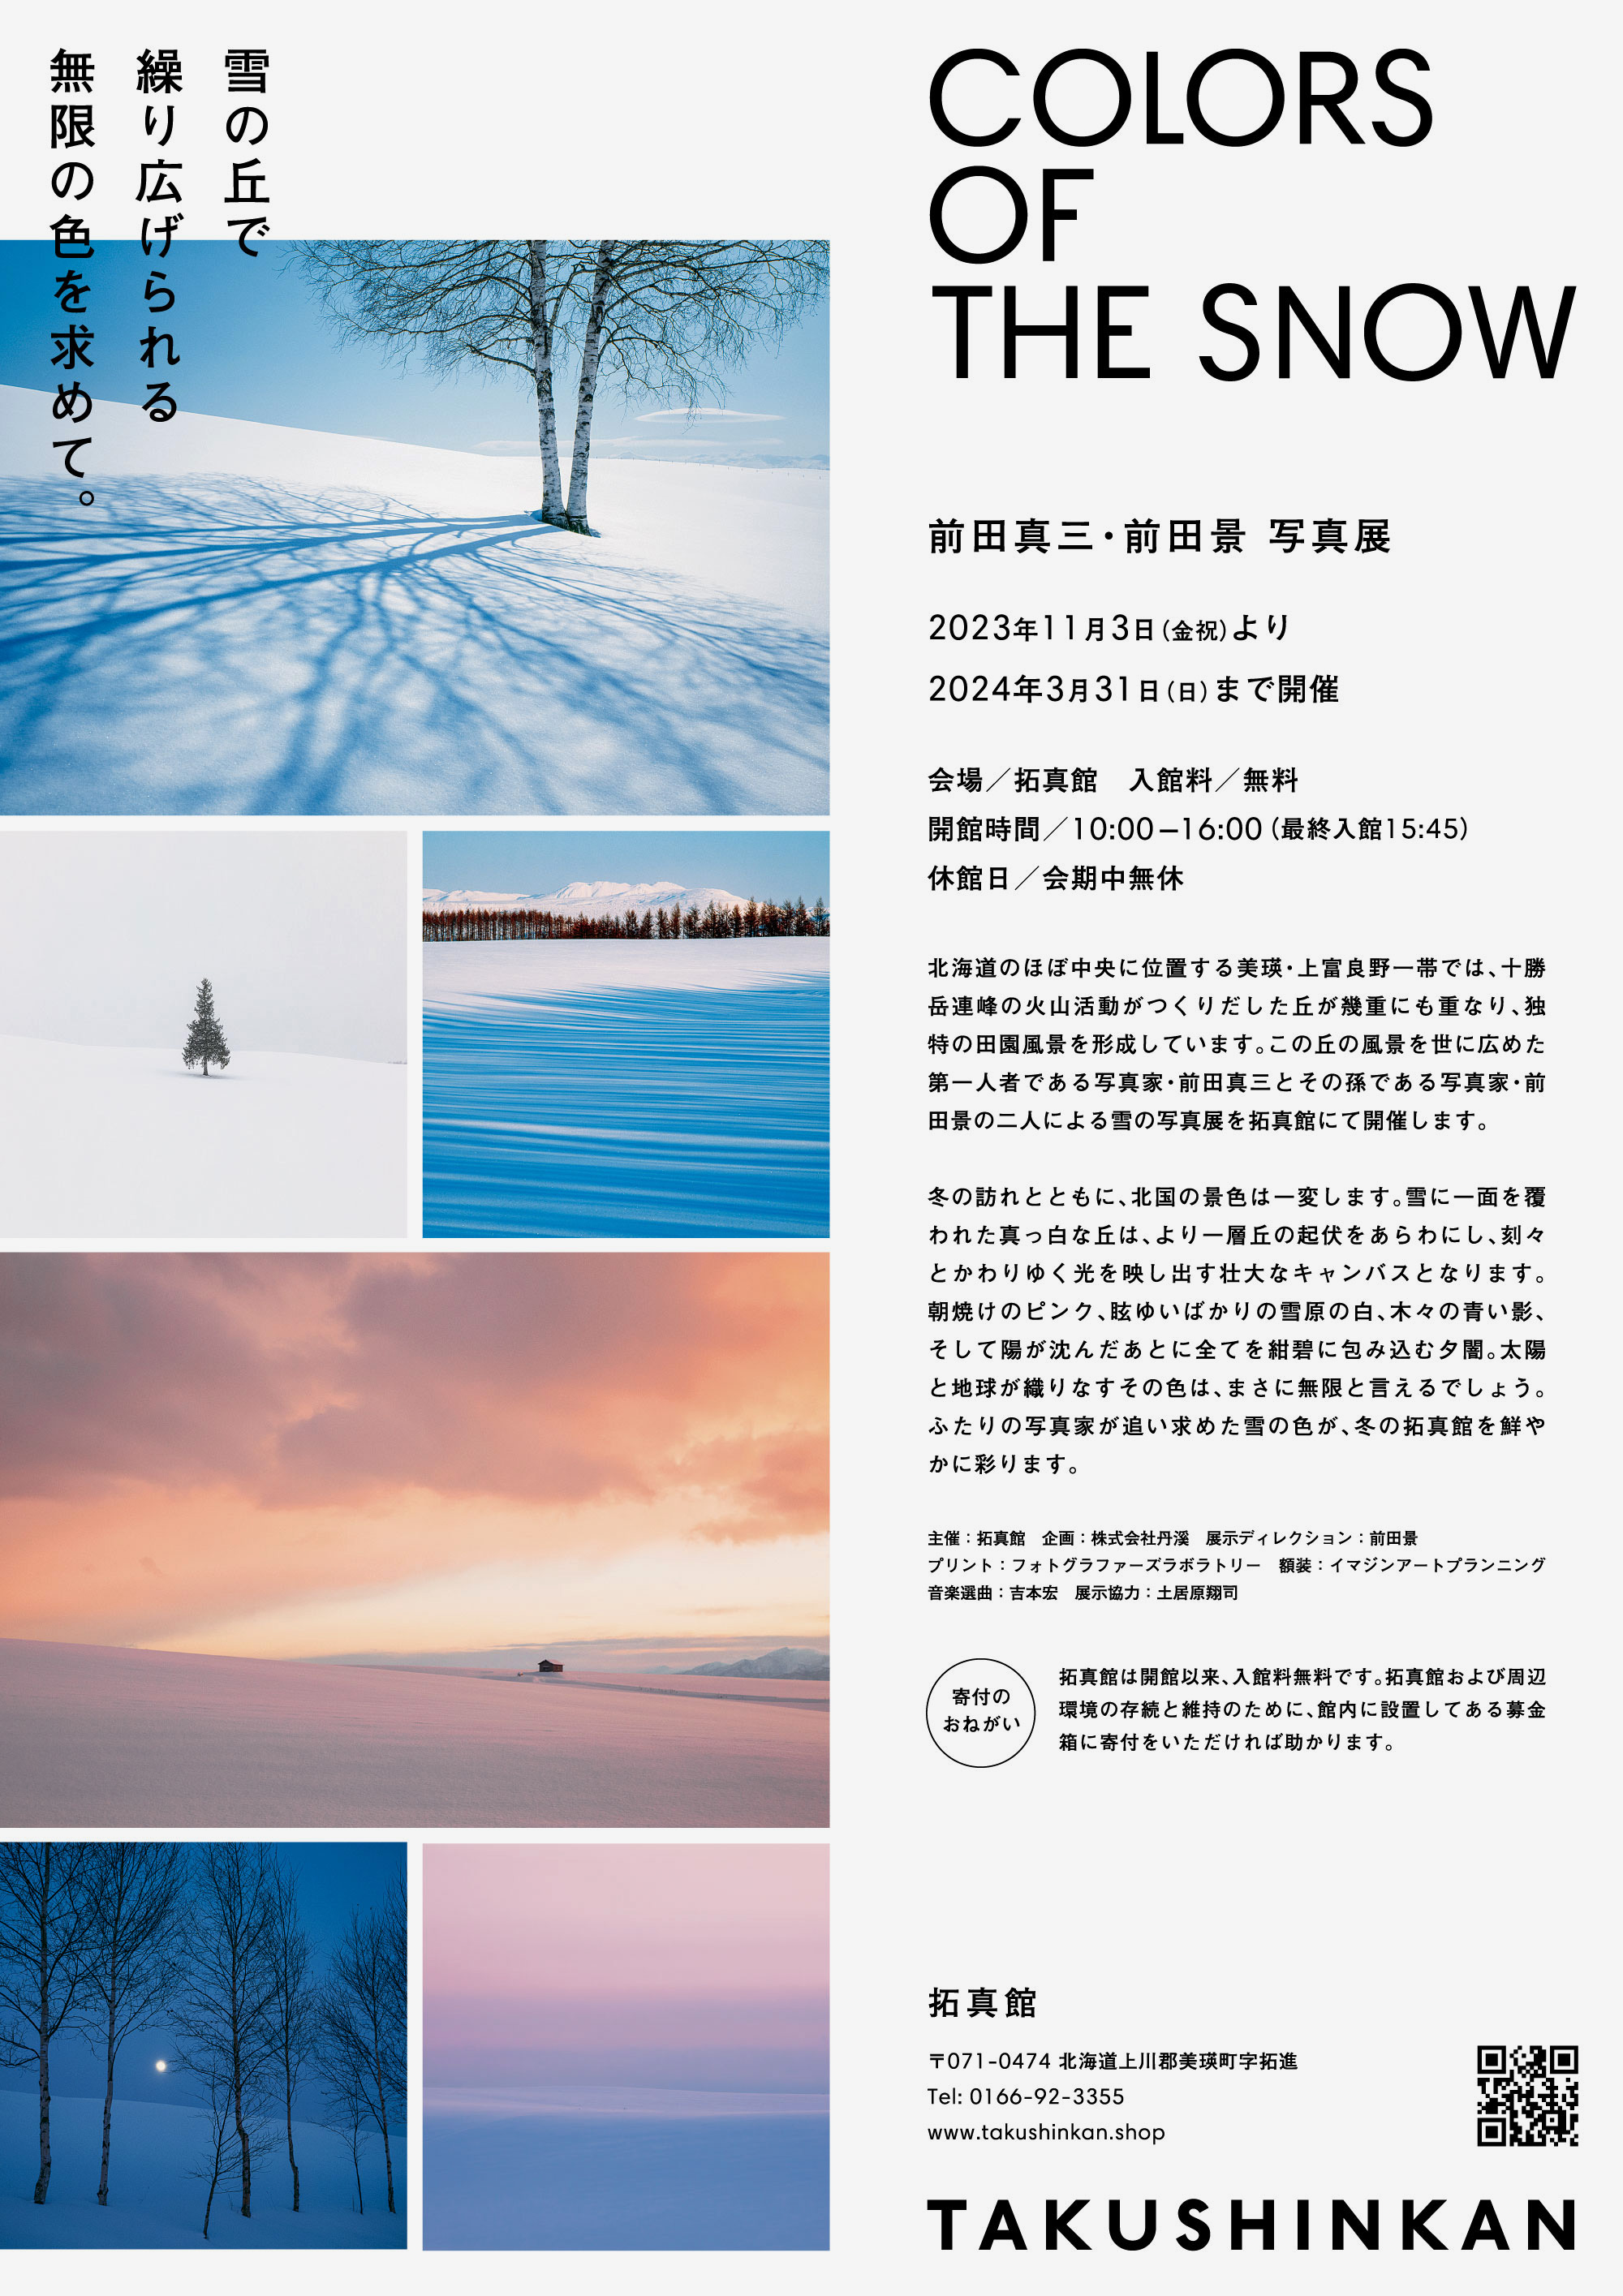 「COLORS OF THE SNOW」展開催のお知らせ